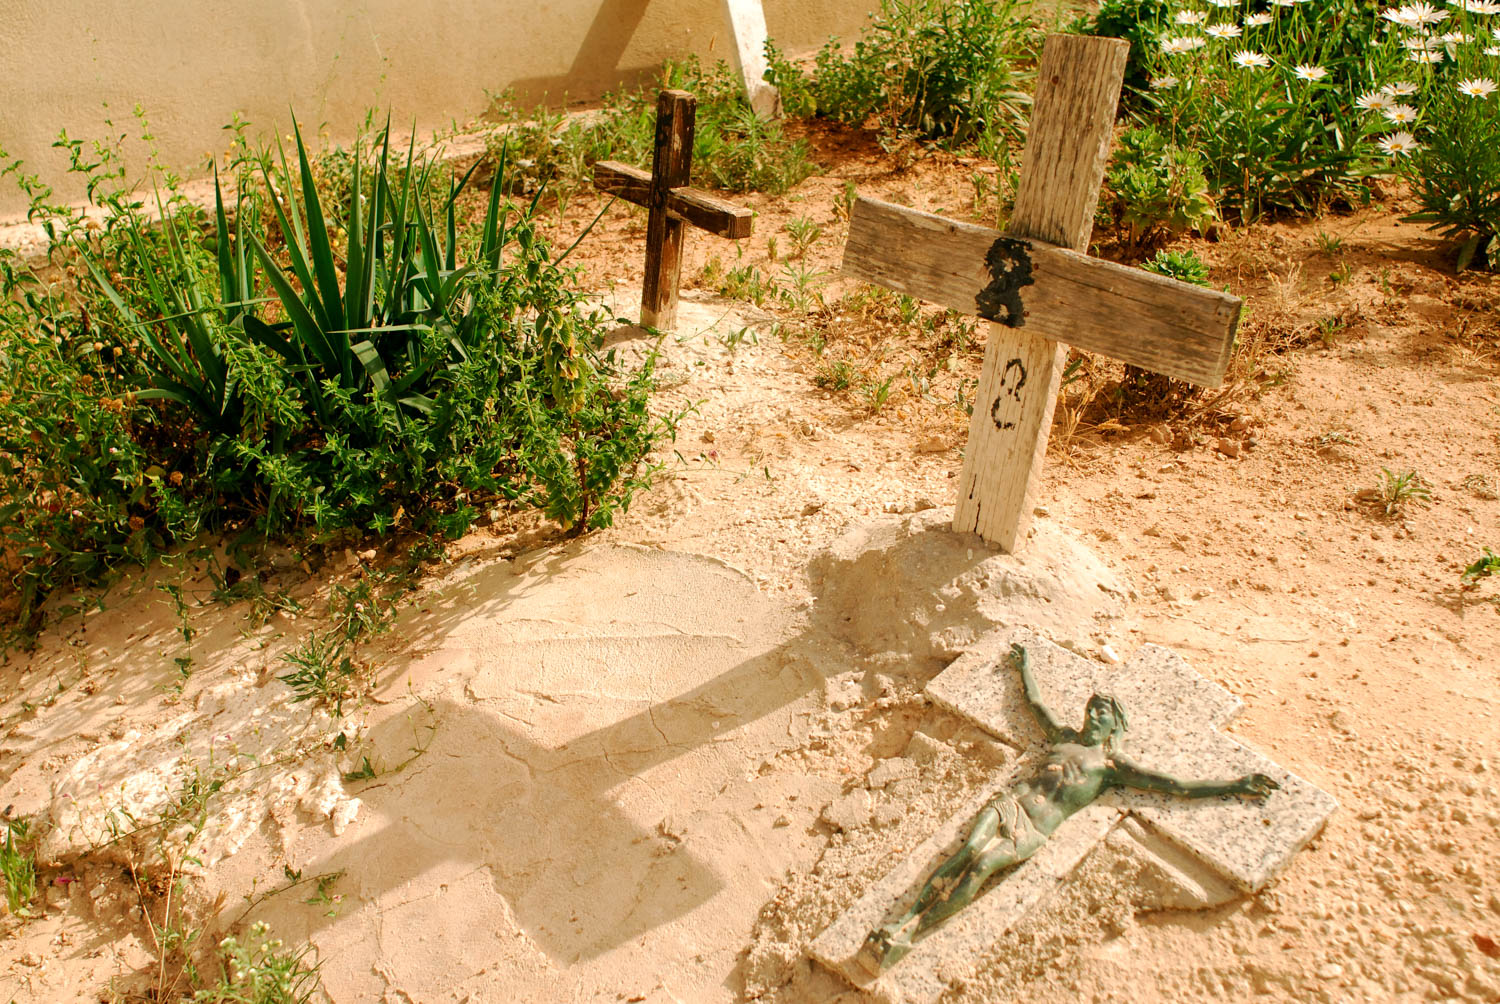 Sicily - Illegal Immigration - Lampedusa Cemetry